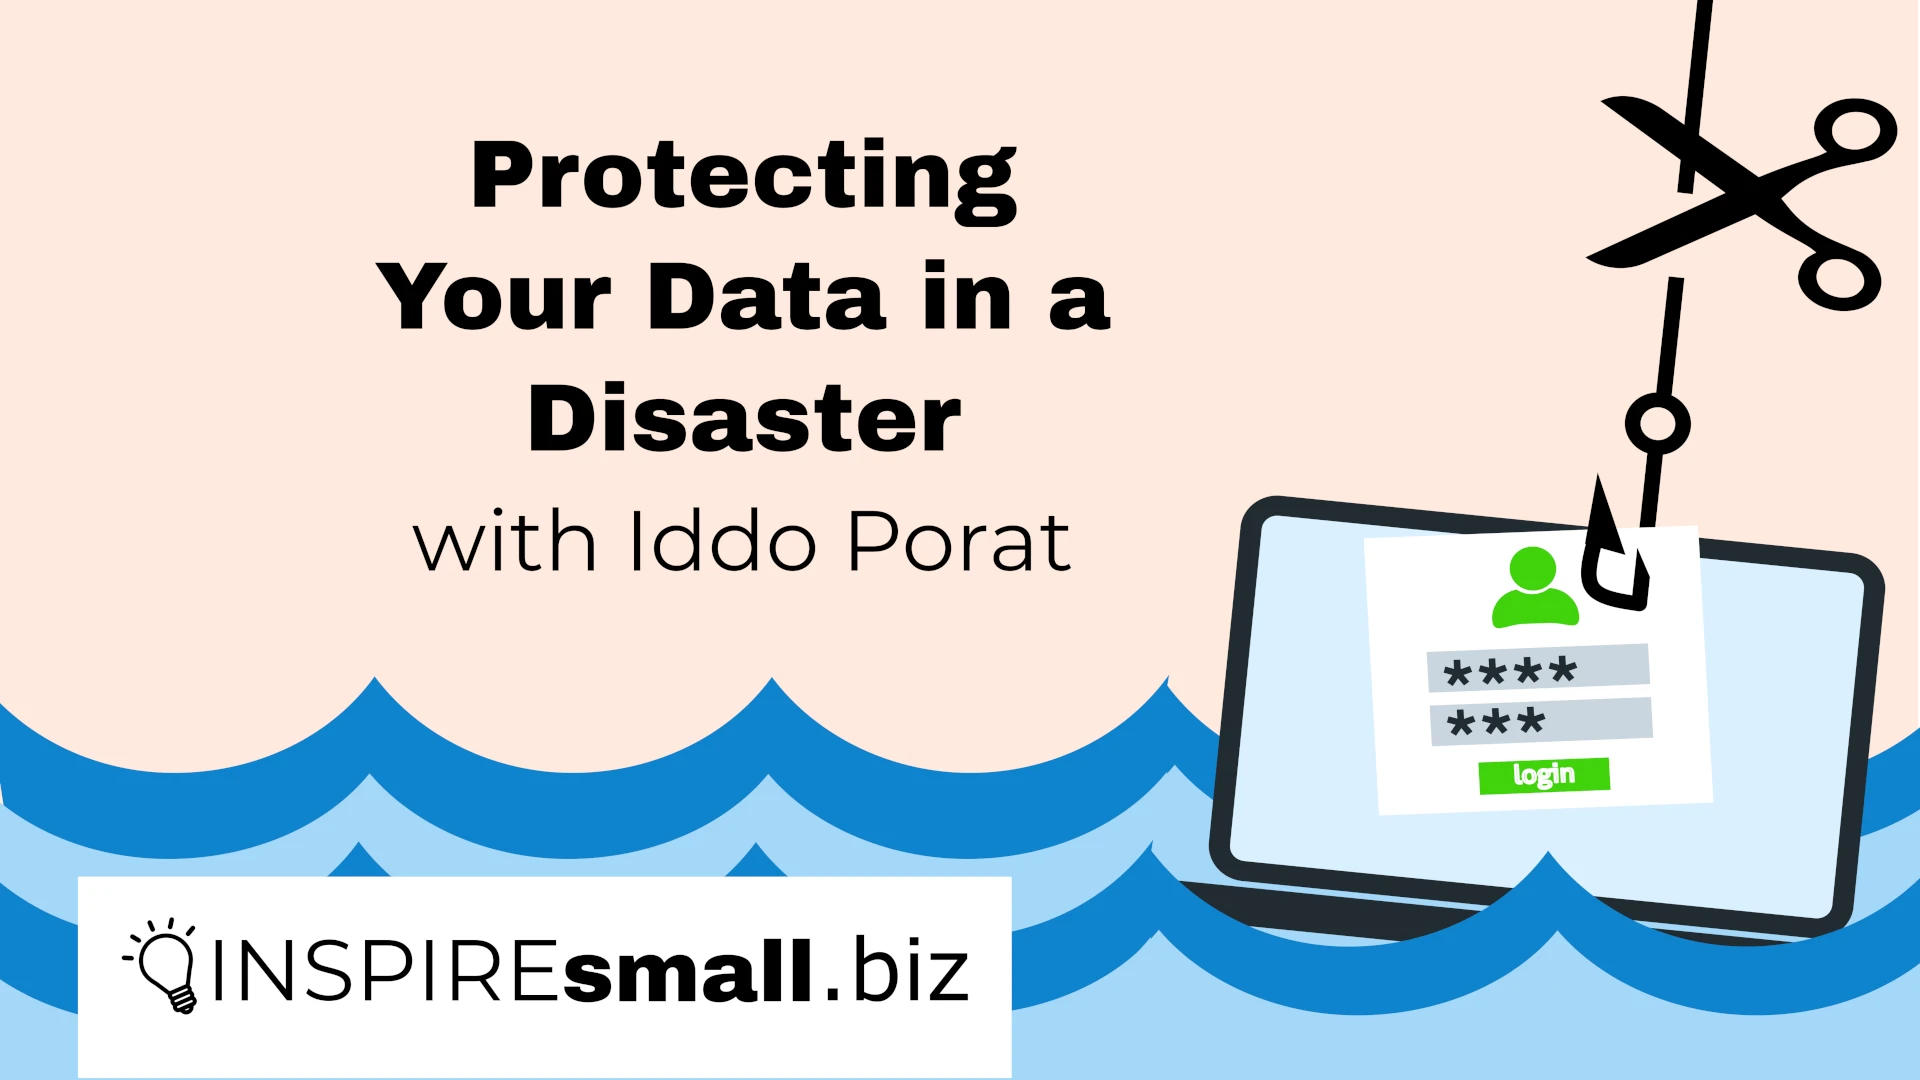 Text reads "Protecting Your Data in a Disaster with Iddo Porat, recorded by INSPIREsmall.biz" over a sea across the bottom of the image in alternating dark and light blue waves, with a laptop floating, and a phishing hook hooked into your data on the screen. A pair of scissors is cutting the phishing line.